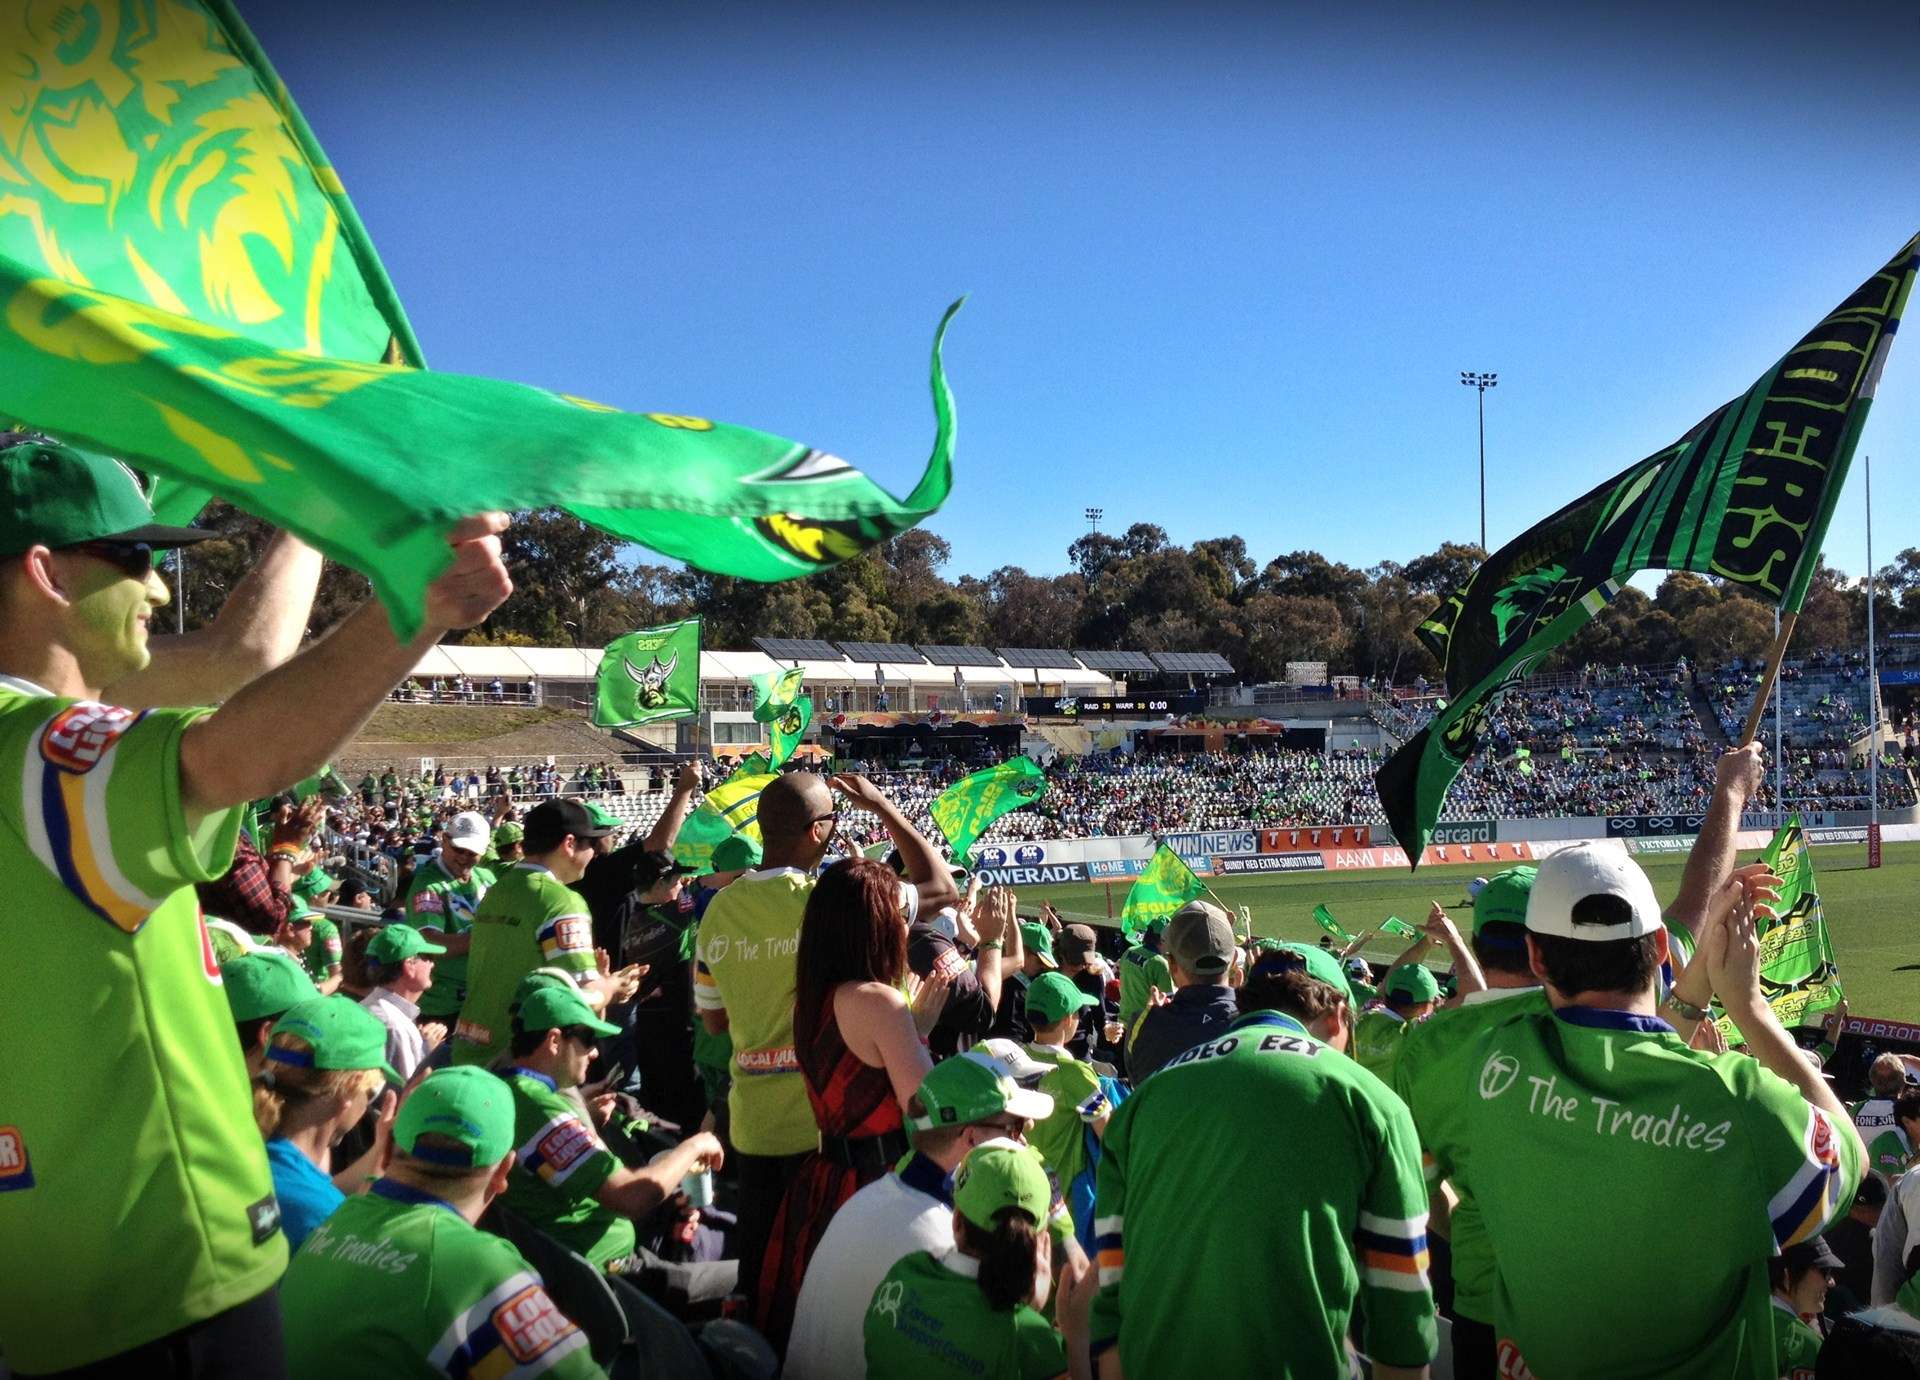 Canberra Raiders Wallpaper And Background Image